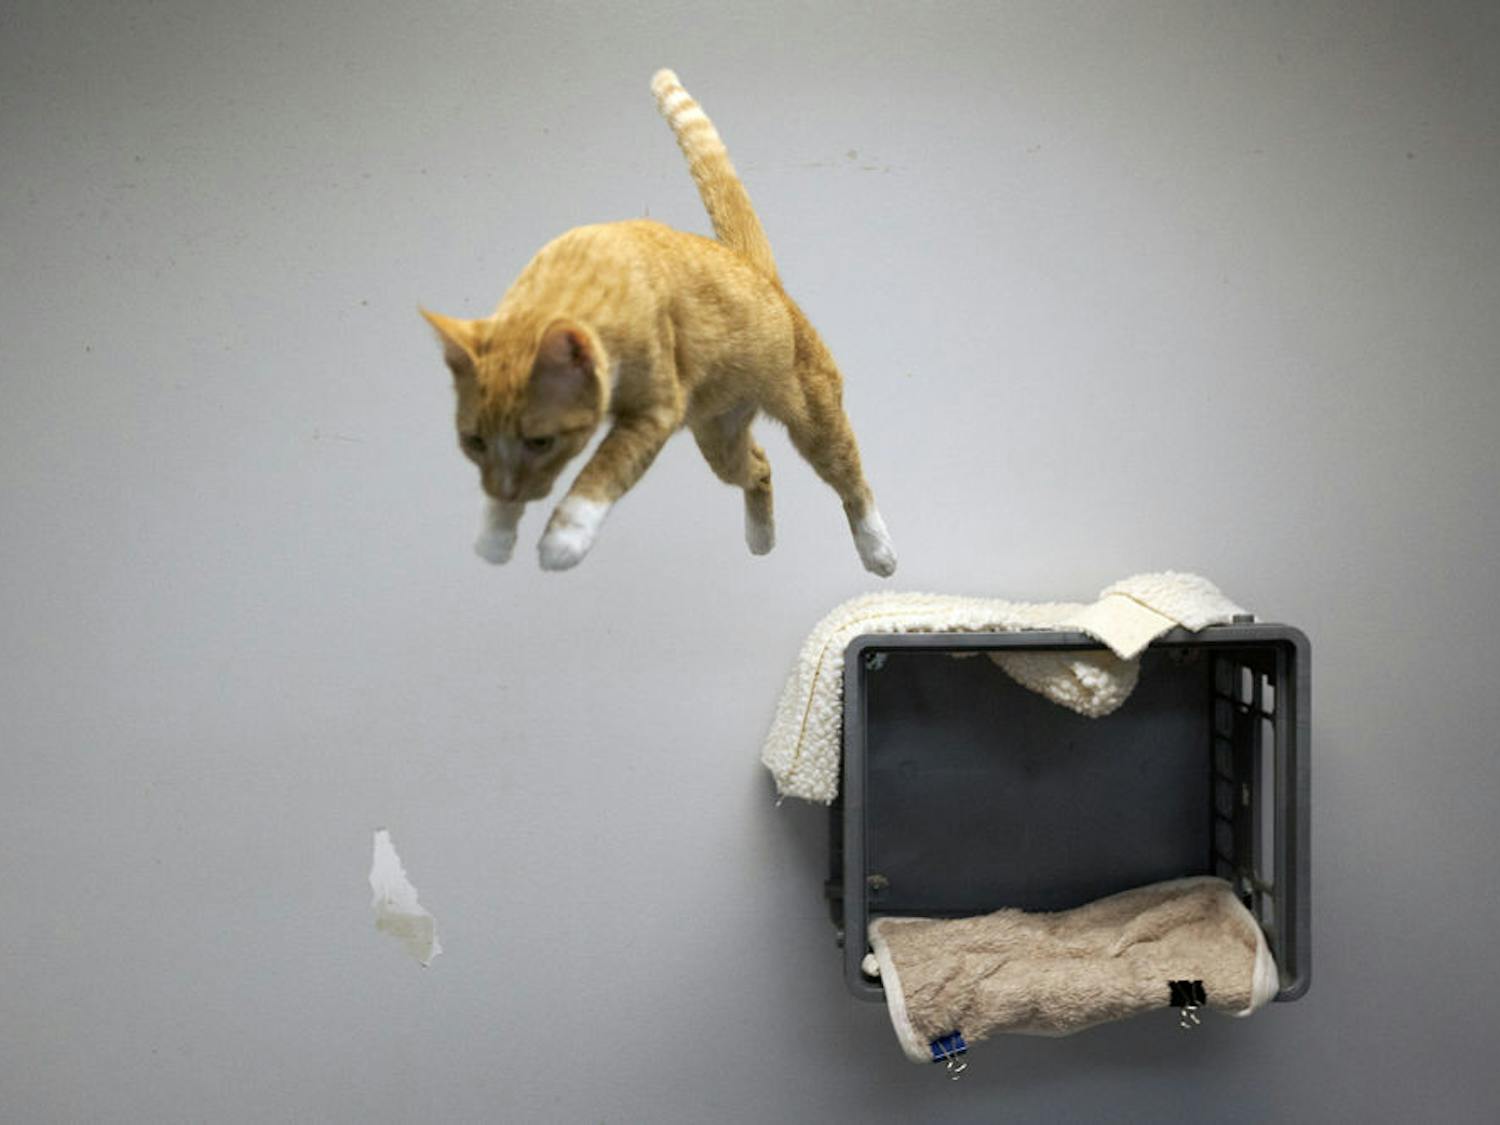 Callie, a 4-year-old cat, leaps from atop a crate at the Alachua County Humane Society.